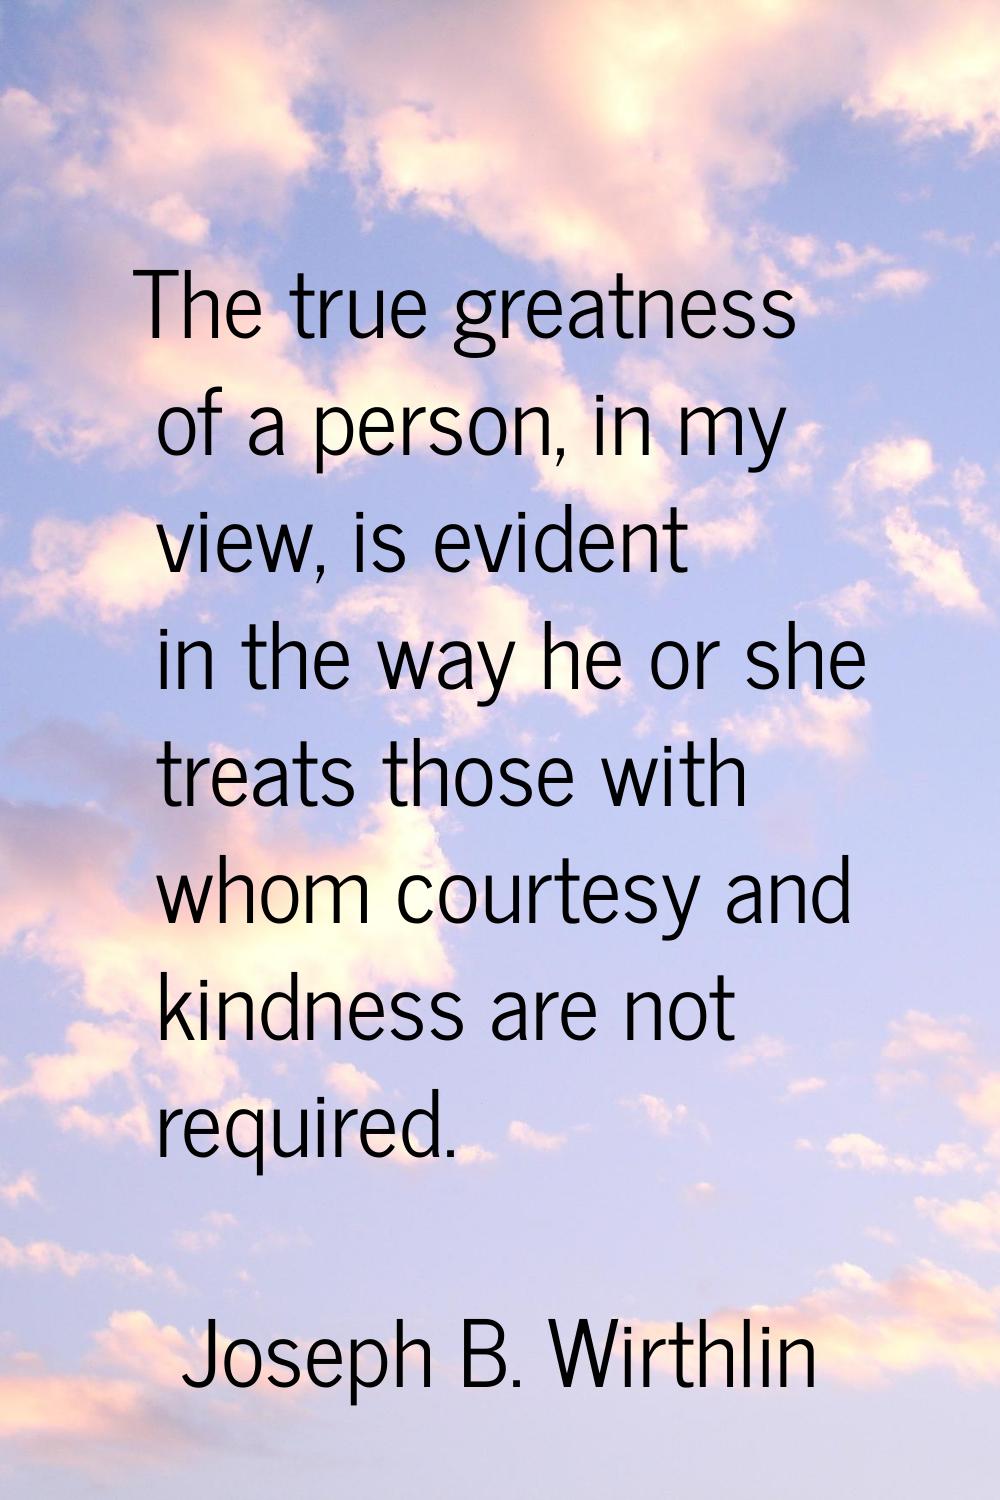 The true greatness of a person, in my view, is evident in the way he or she treats those with whom 